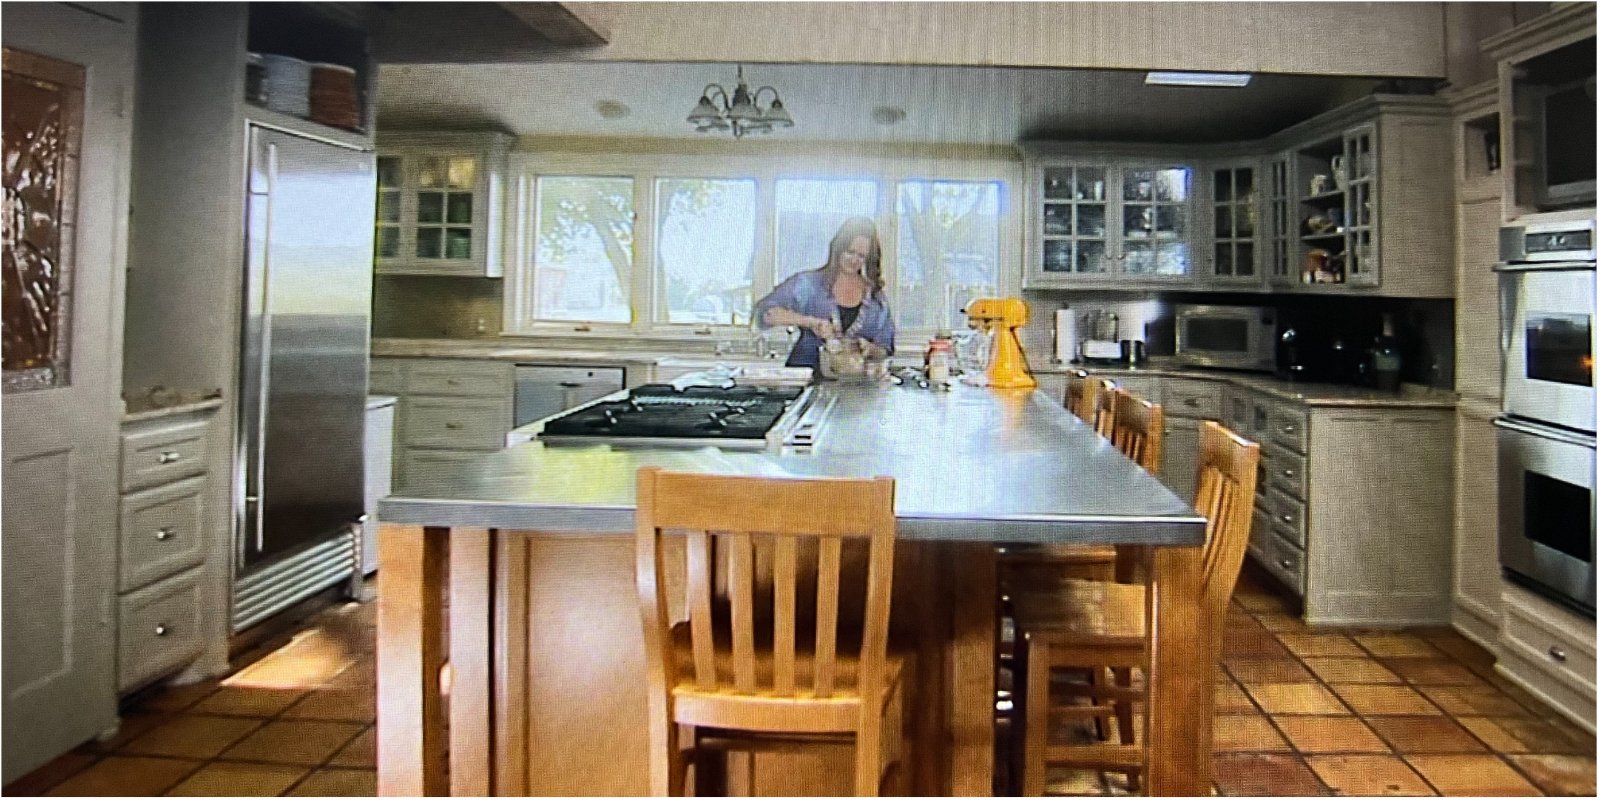 Ree Drummond's home kitchen was featured in an episode of her Food Network series.